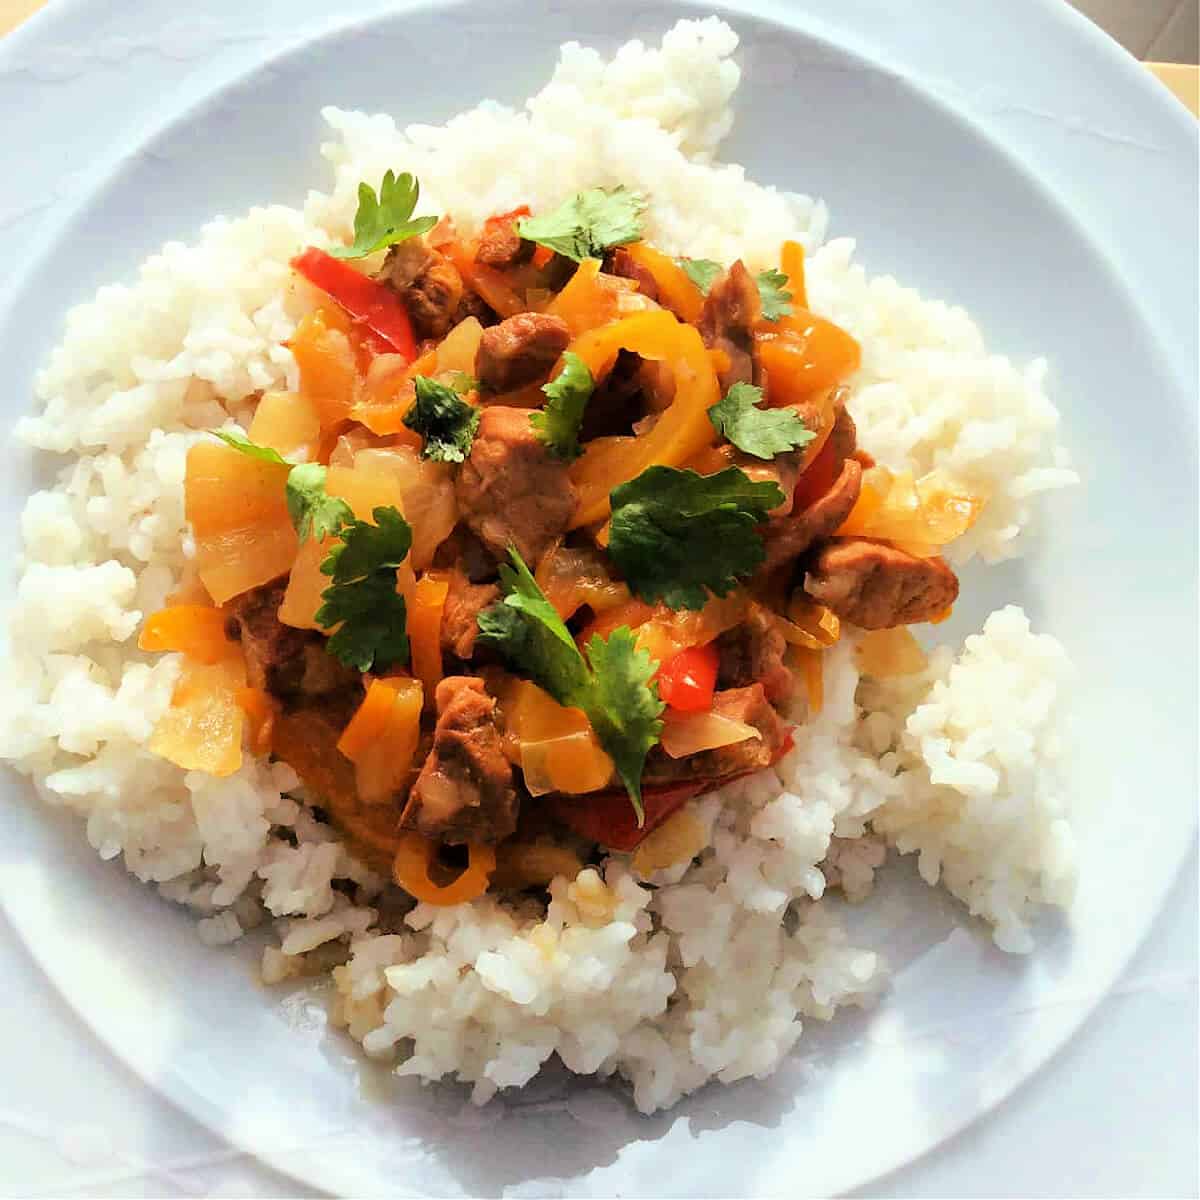 Plate with sweet and sour pork on rice.